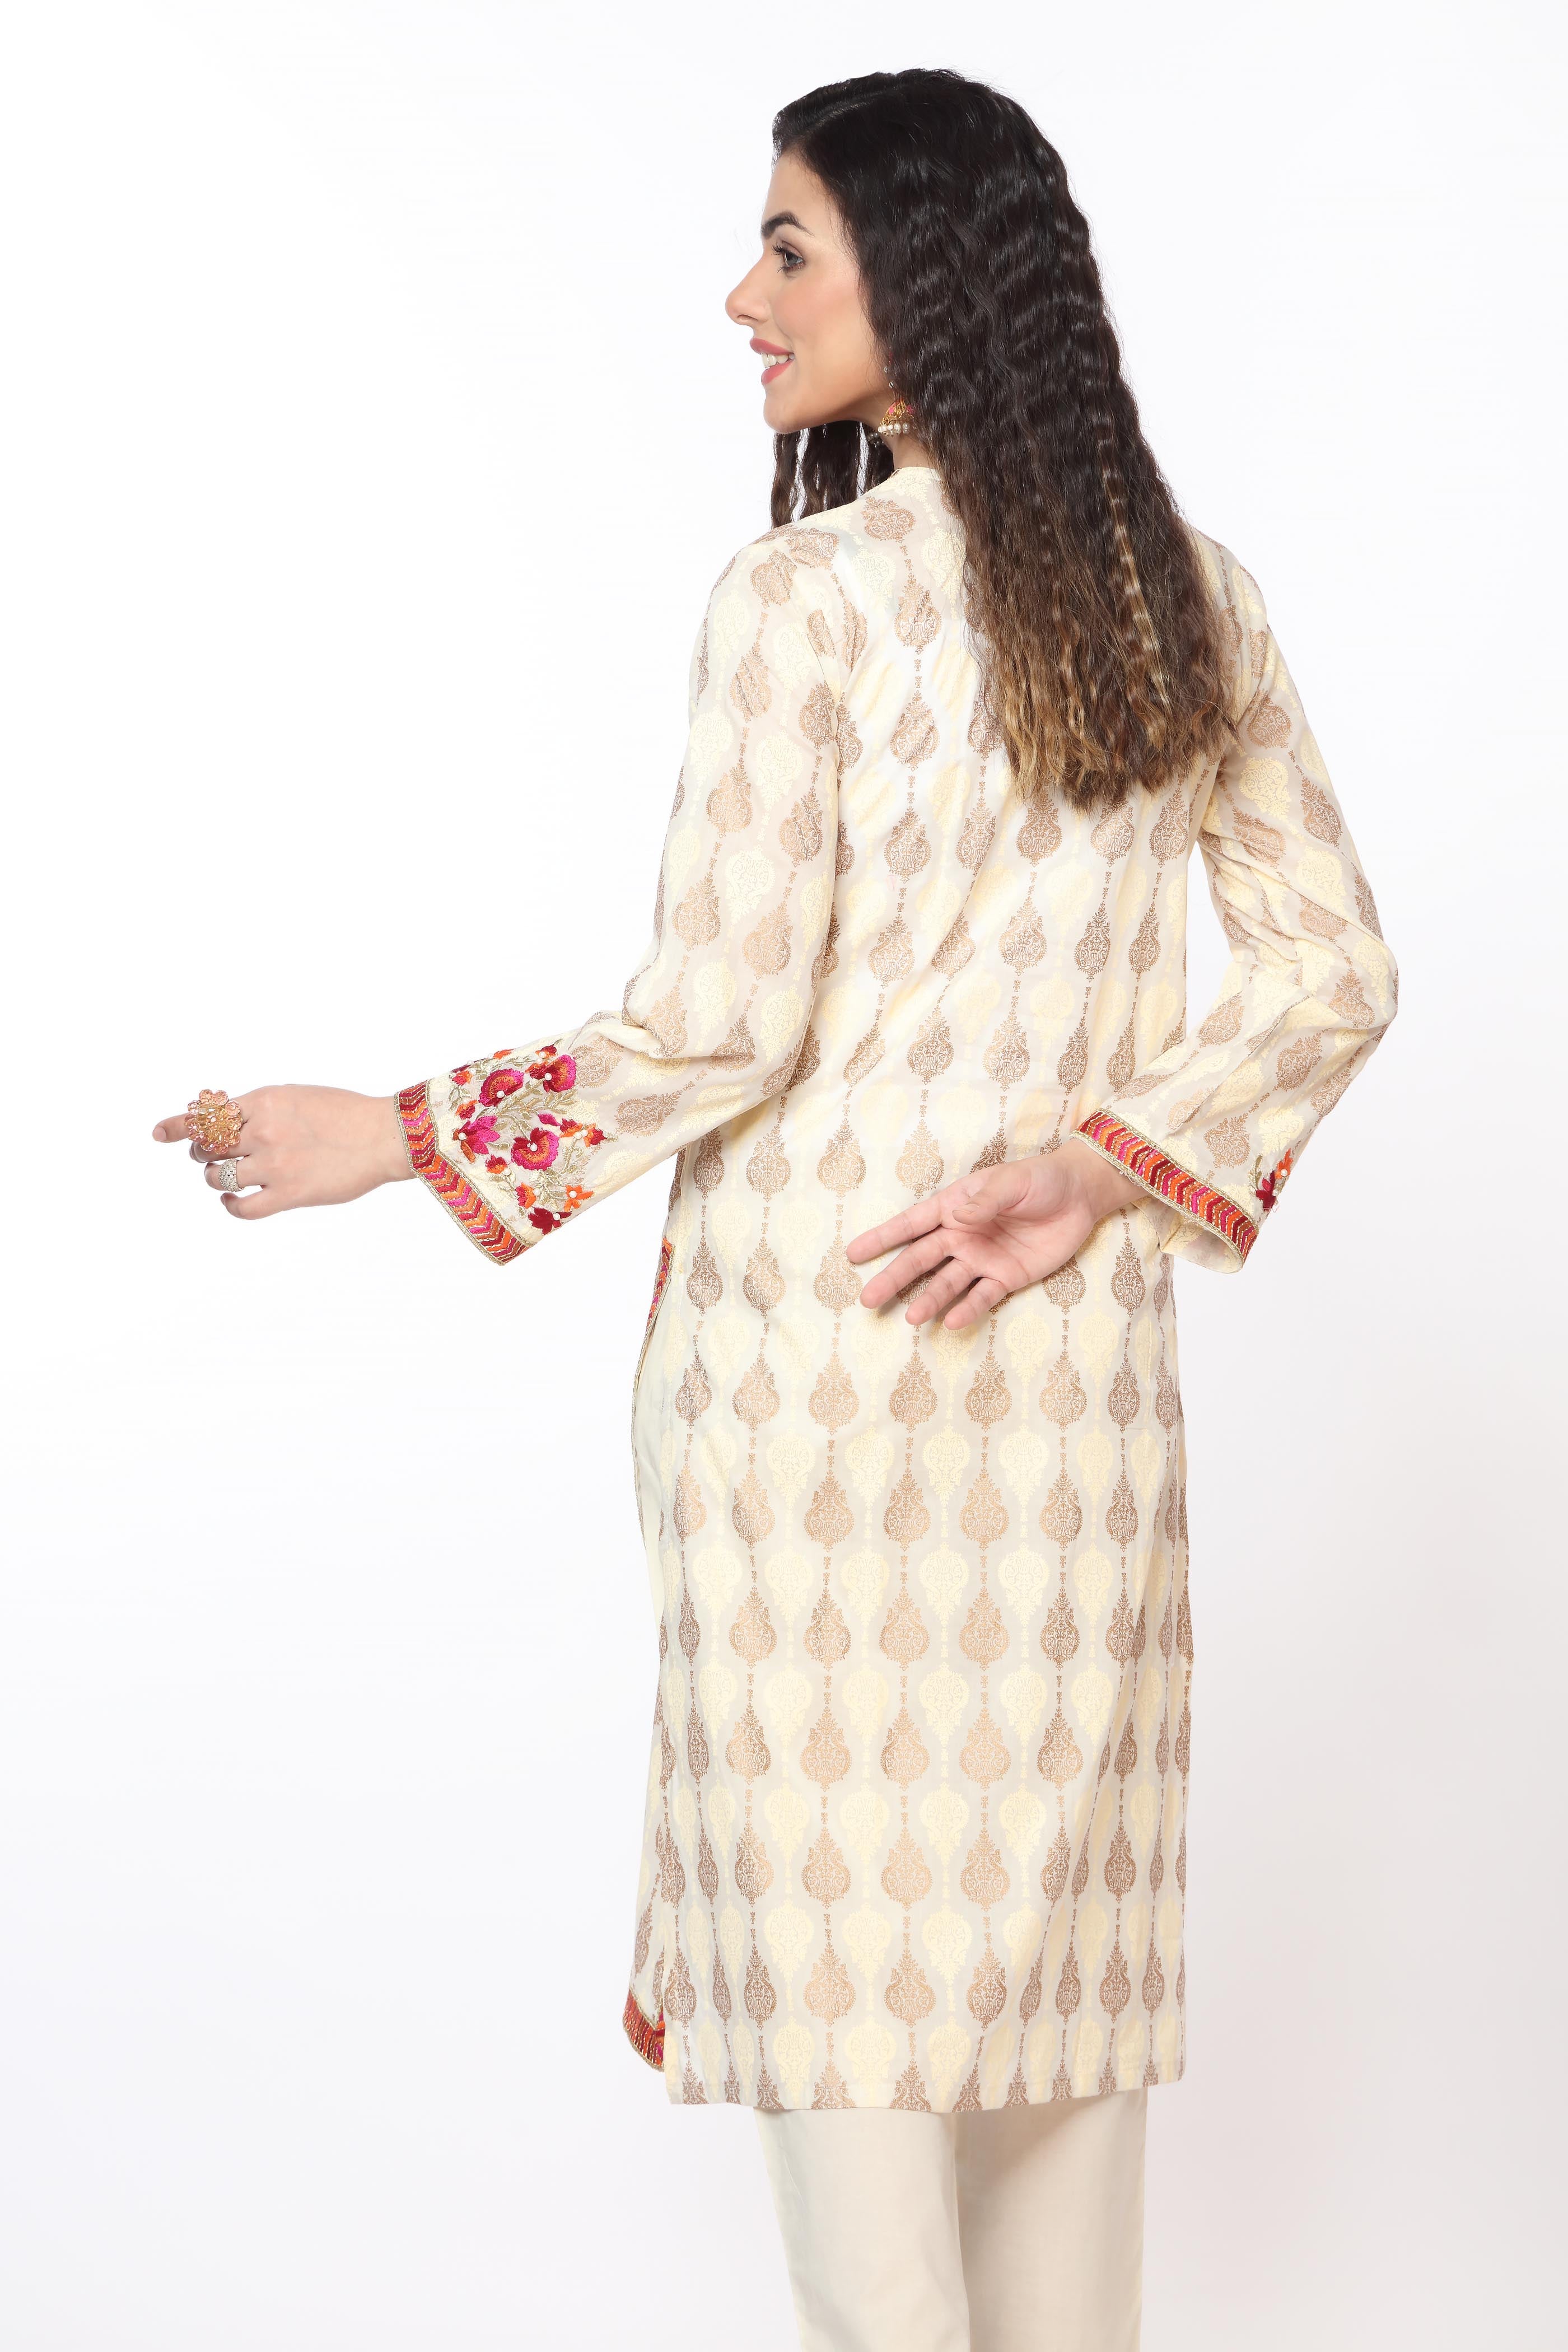 Pearl Phool in Off White coloured Printed Lawn fabric 3